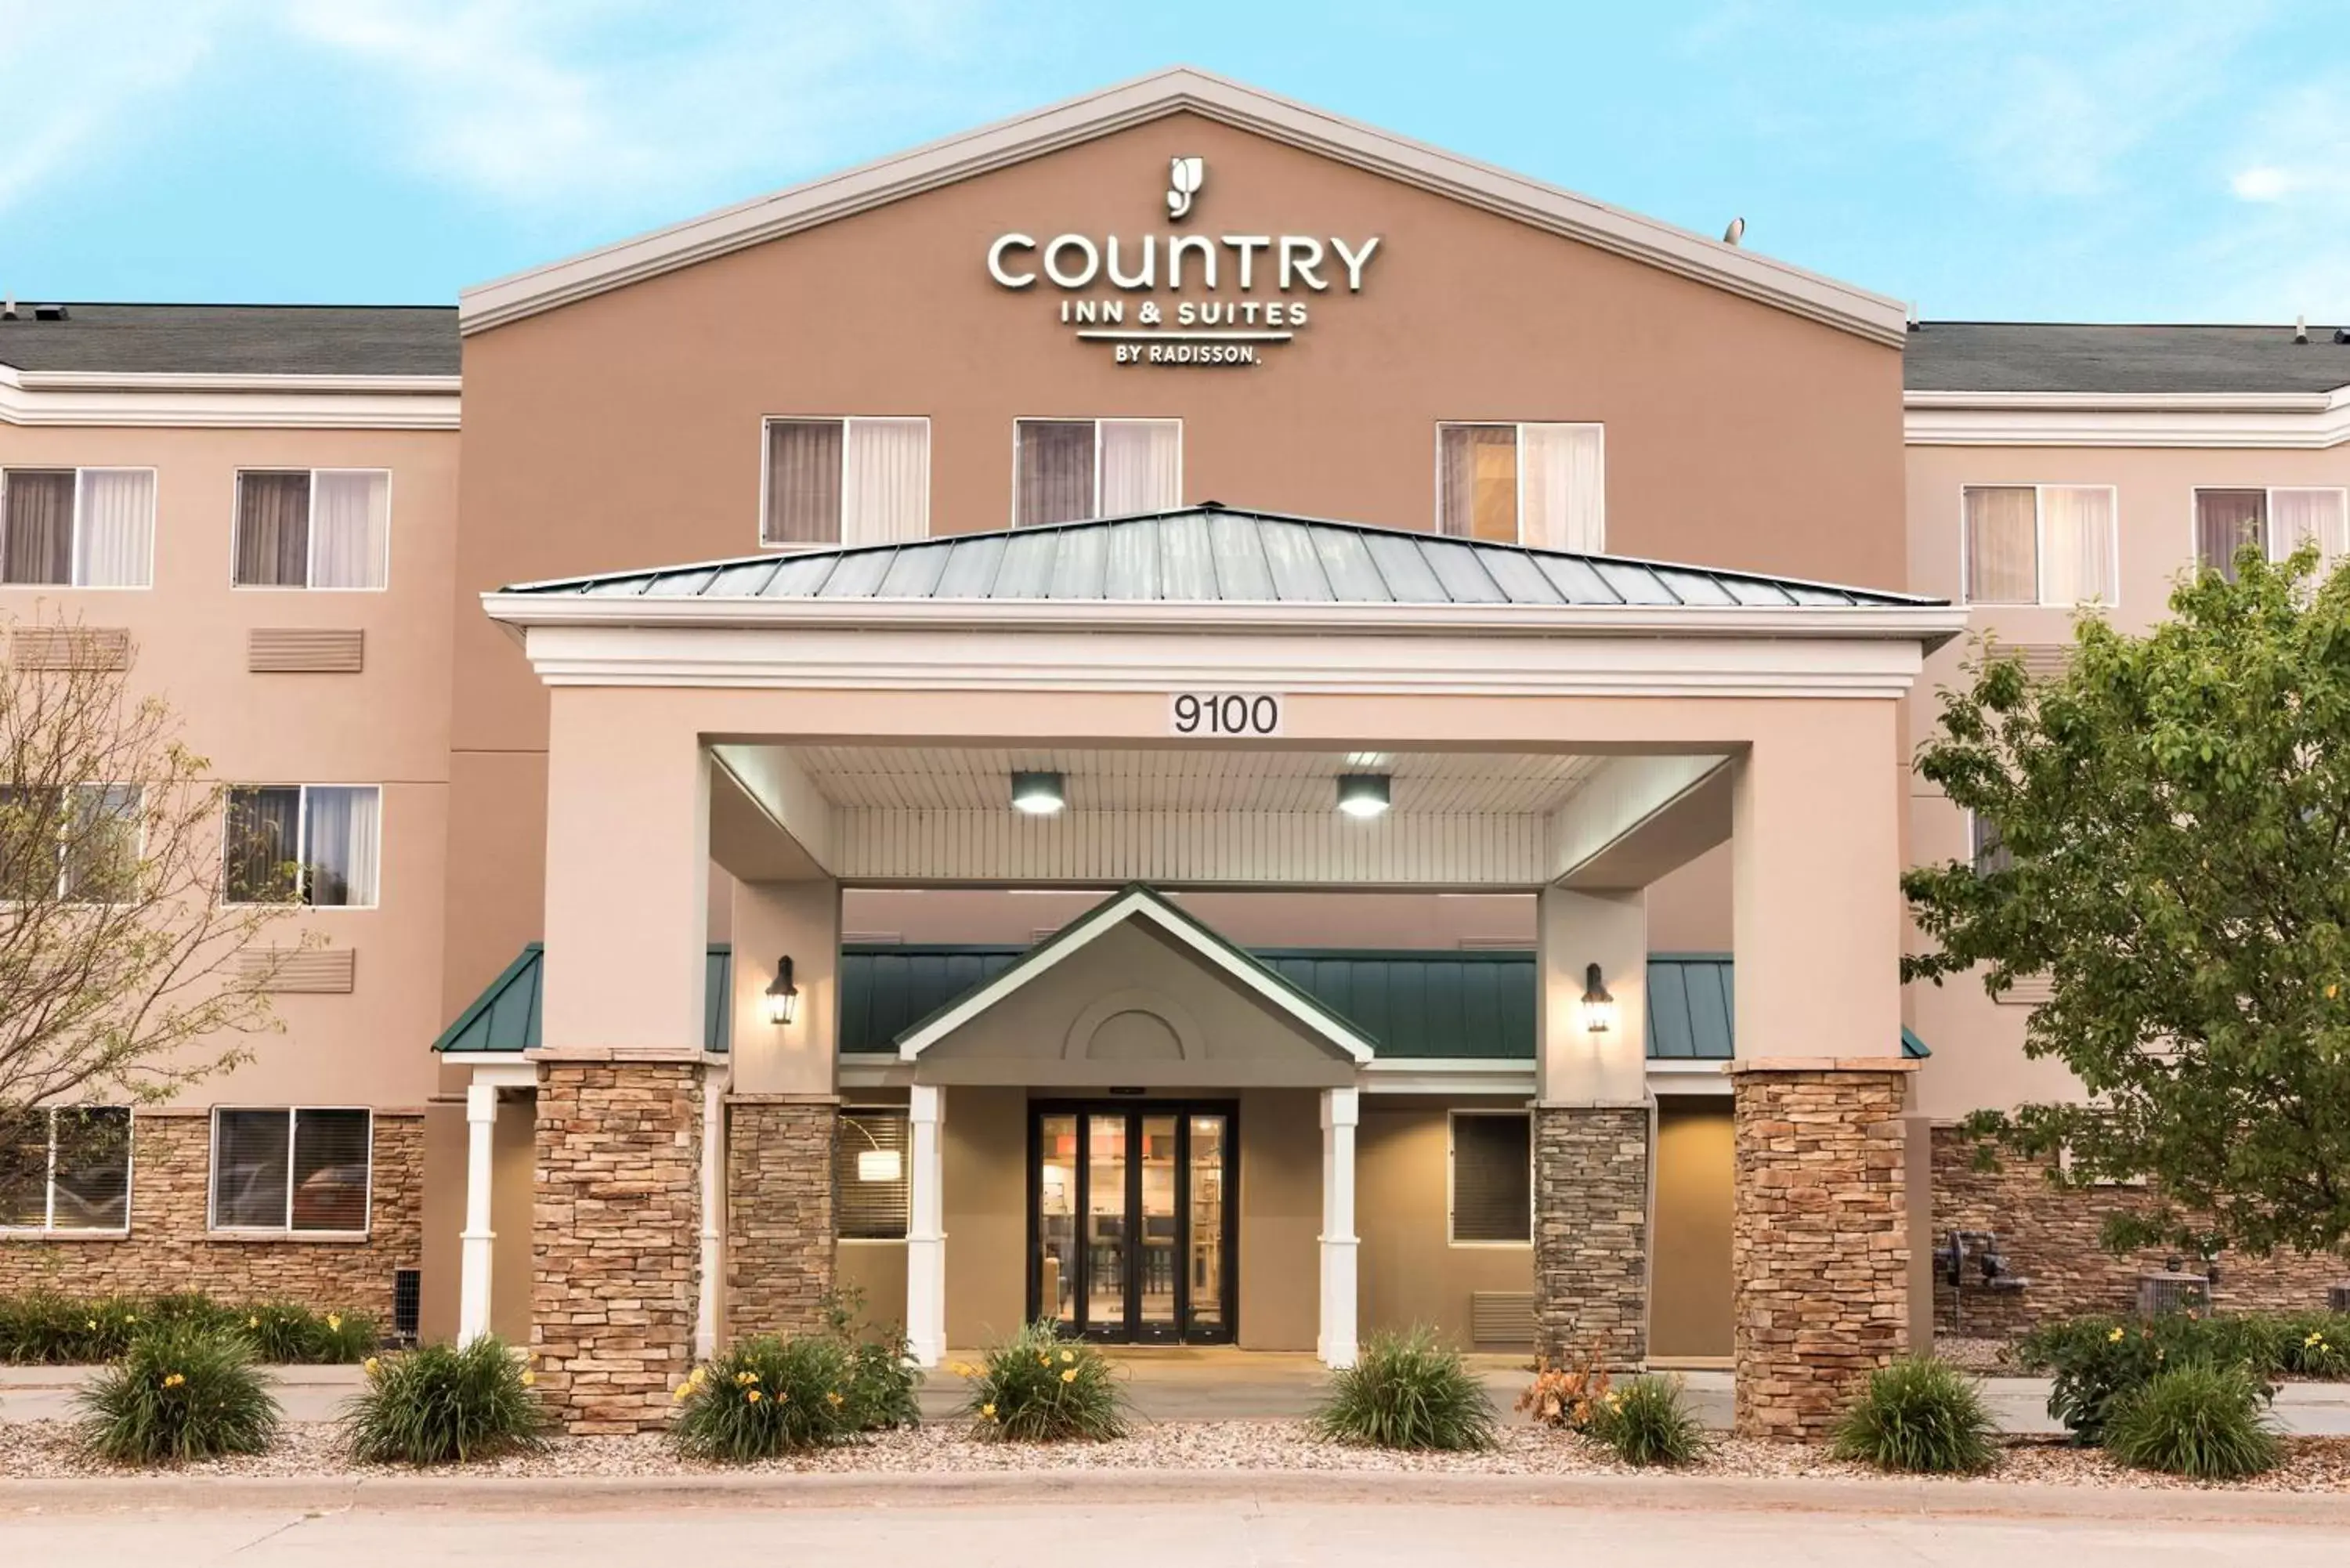 Property building in Country Inn & Suites by Radisson, Cedar Rapids Airport, IA